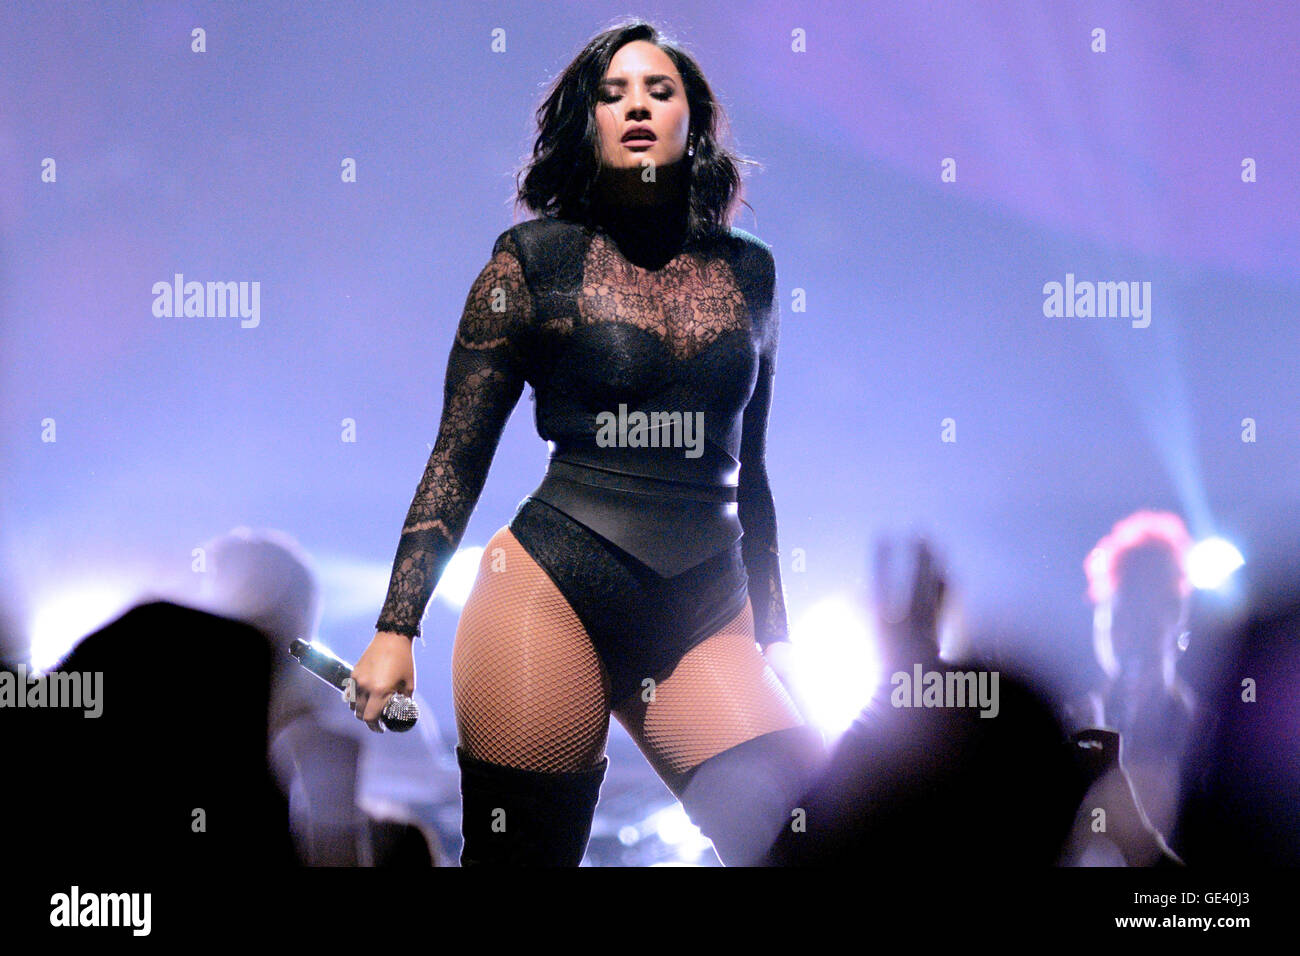 Toronto, Canada. 23rd July, 2016. Singer Demi Lovato performs at the Air Canada Centre during the Future Now Tour. Credit:  EXImages/Alamy Live News Stock Photo